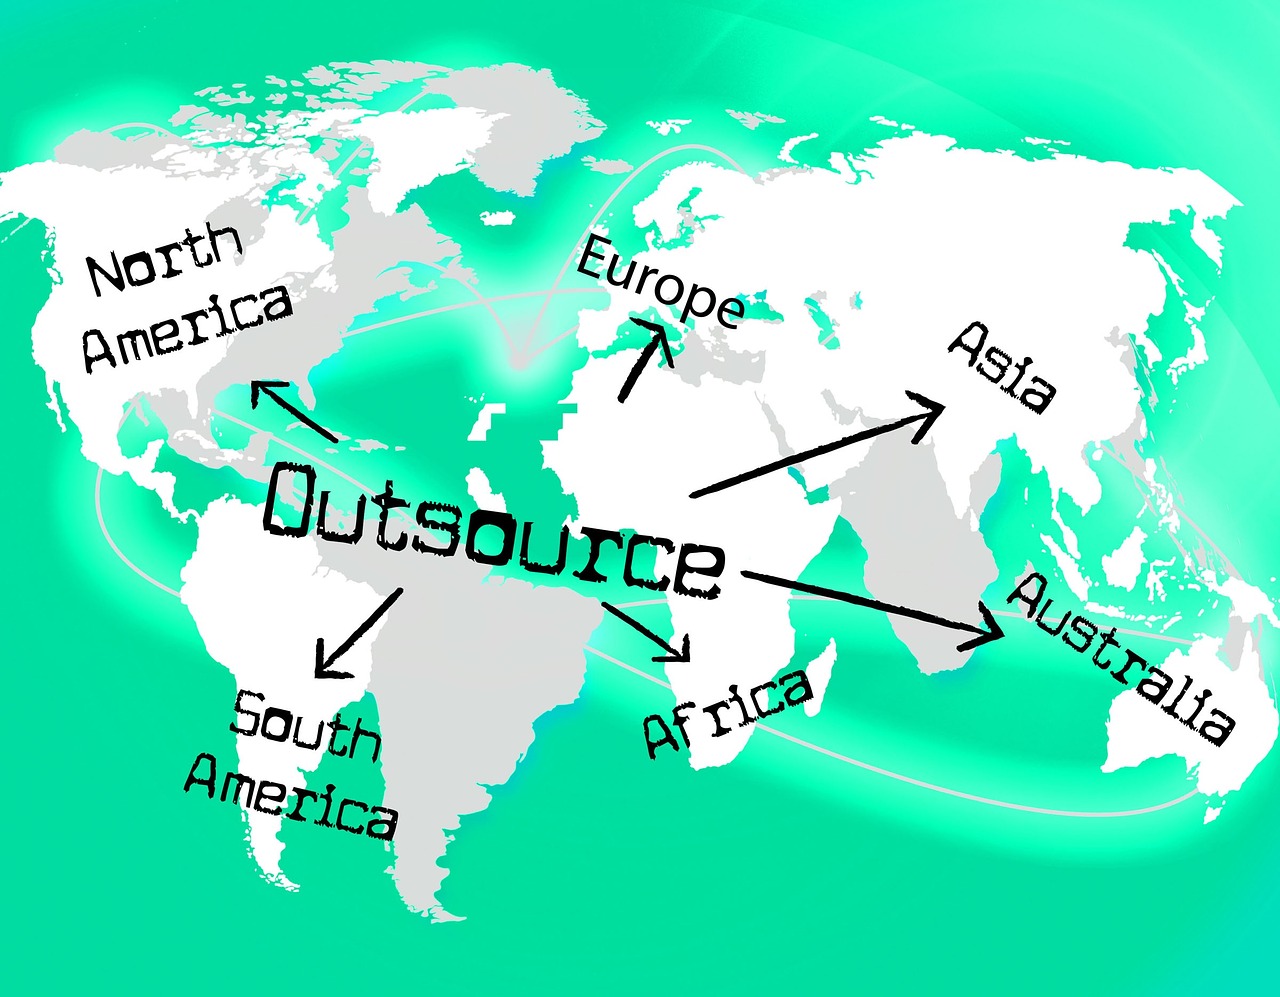 Globalized business process outsourcing services